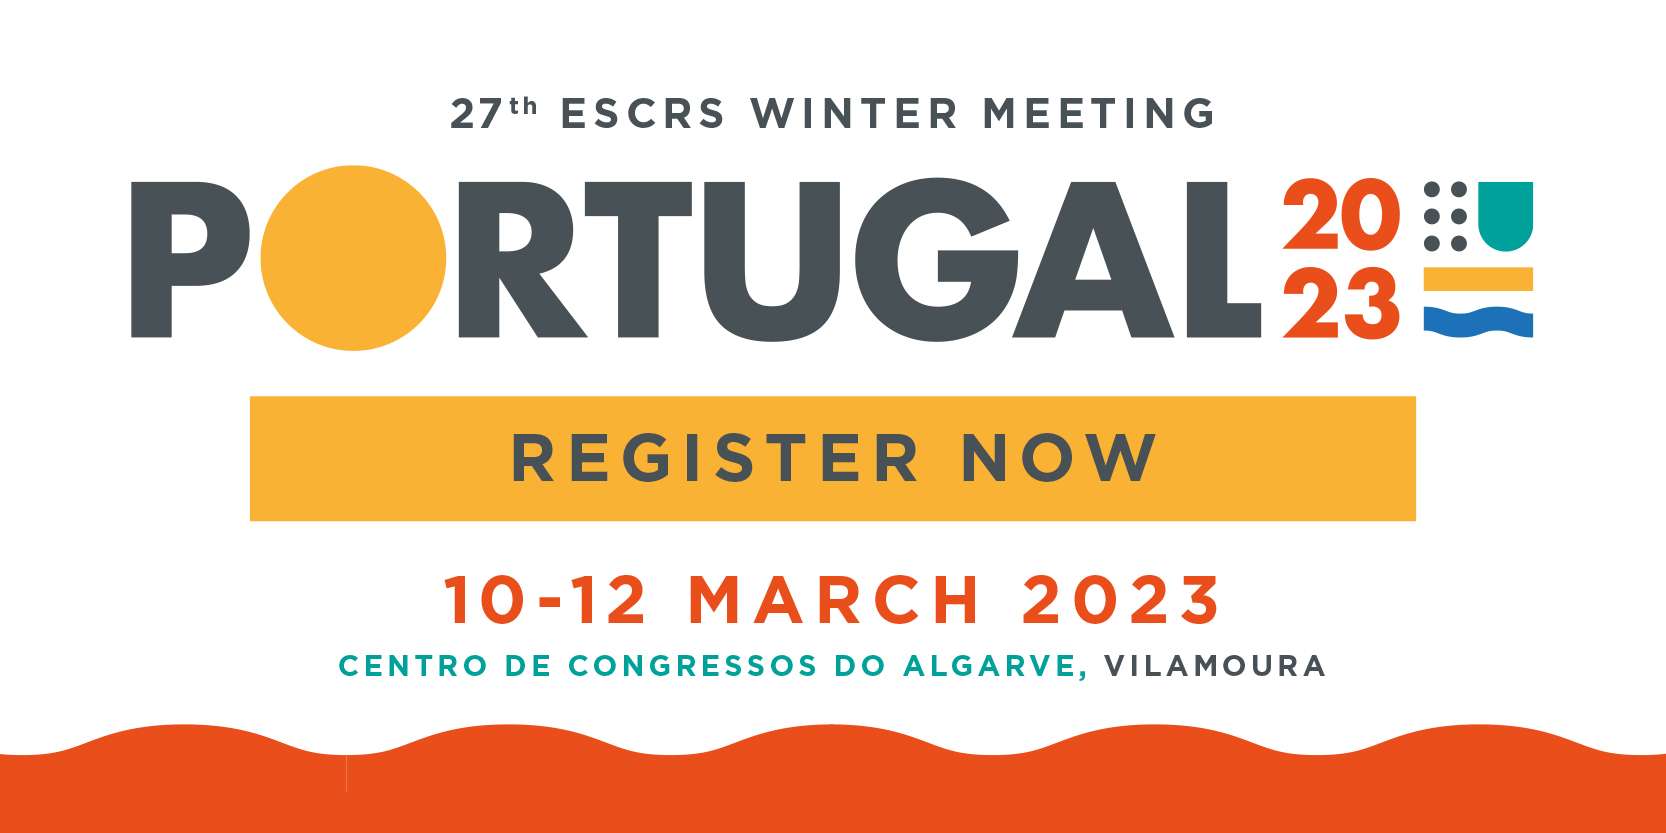 ESCRS Winter Meeting 2023 International Council of Ophthalmology